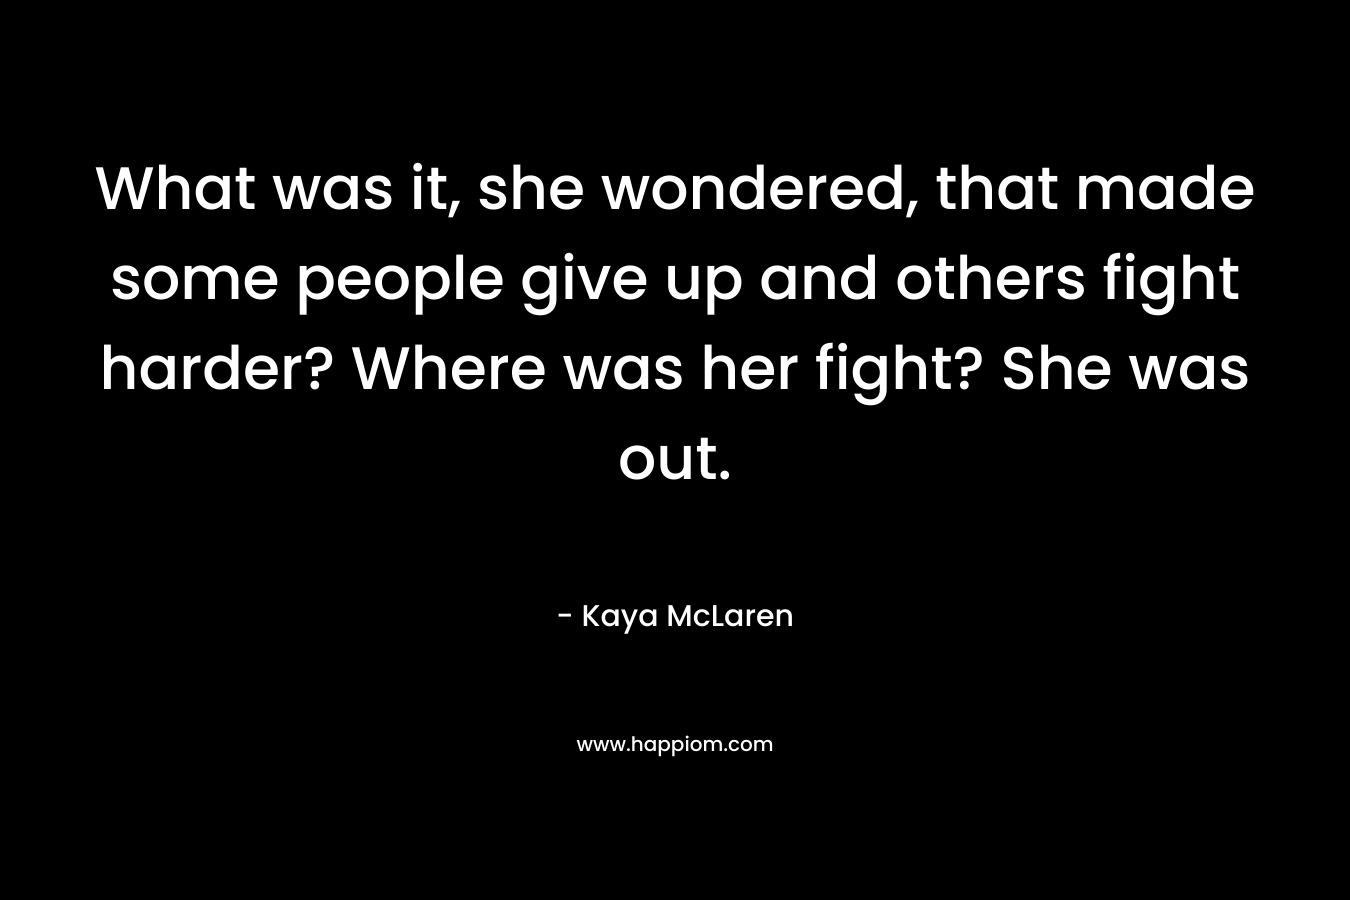 What was it, she wondered, that made some people give up and others fight harder? Where was her fight? She was out. – Kaya McLaren